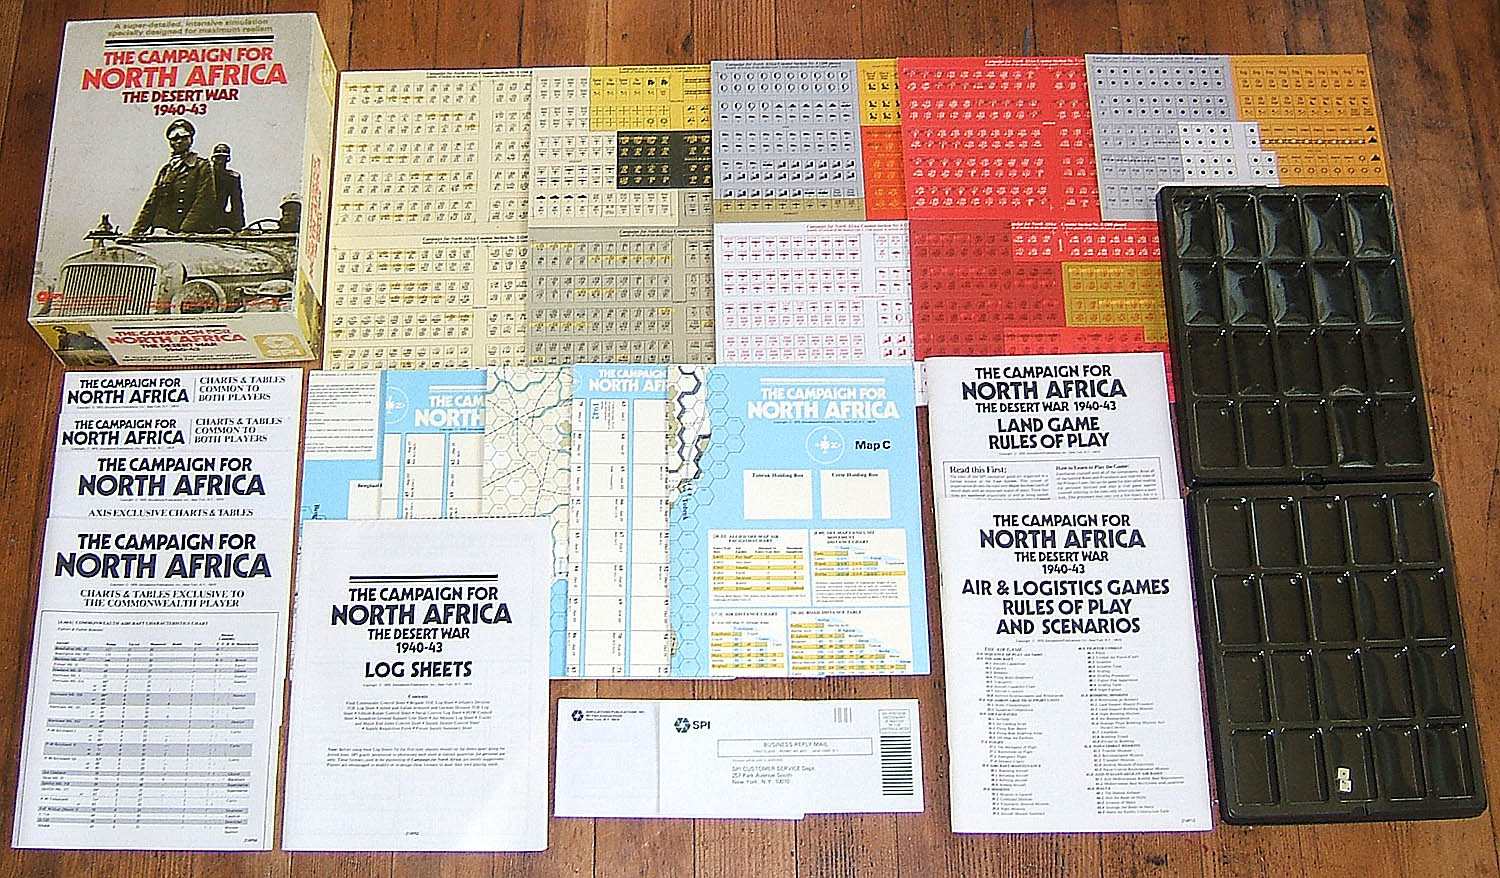 Photograph of box contents for the game “The Campaign for North Africa”